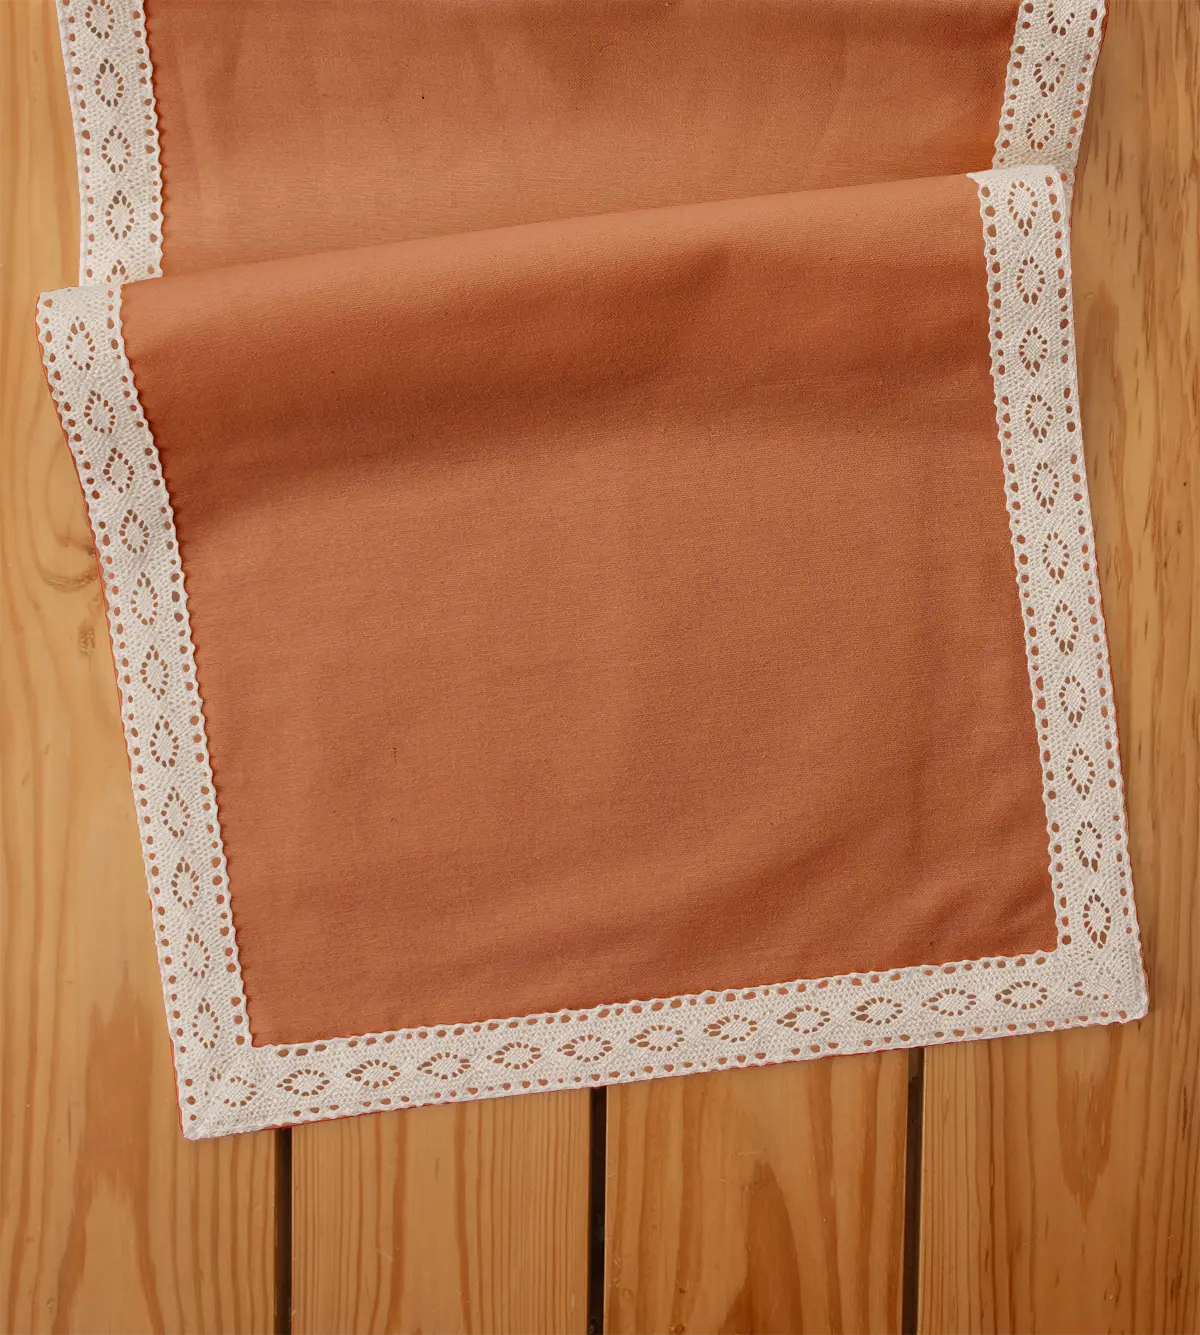 Solid orange 100% cotton plain table runner for 4 seater or 6 seater dining  with lace boarder